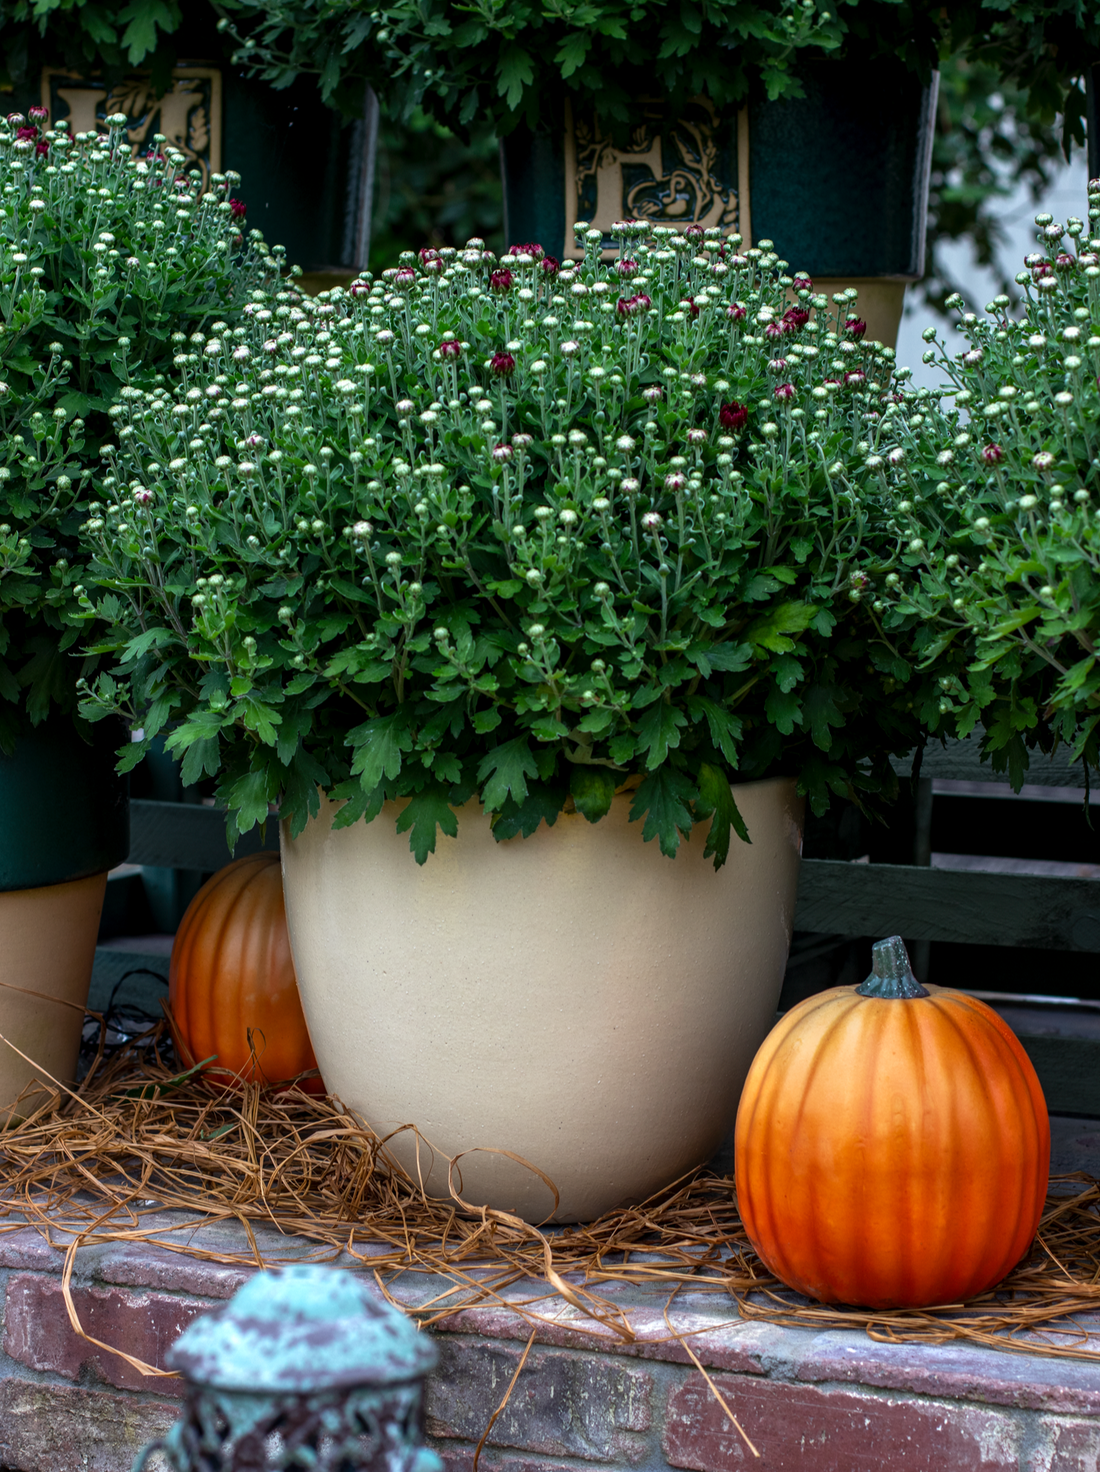 simple modern cream glazed ceramic round egg planter with mums and two orange pumpkins on a brick table